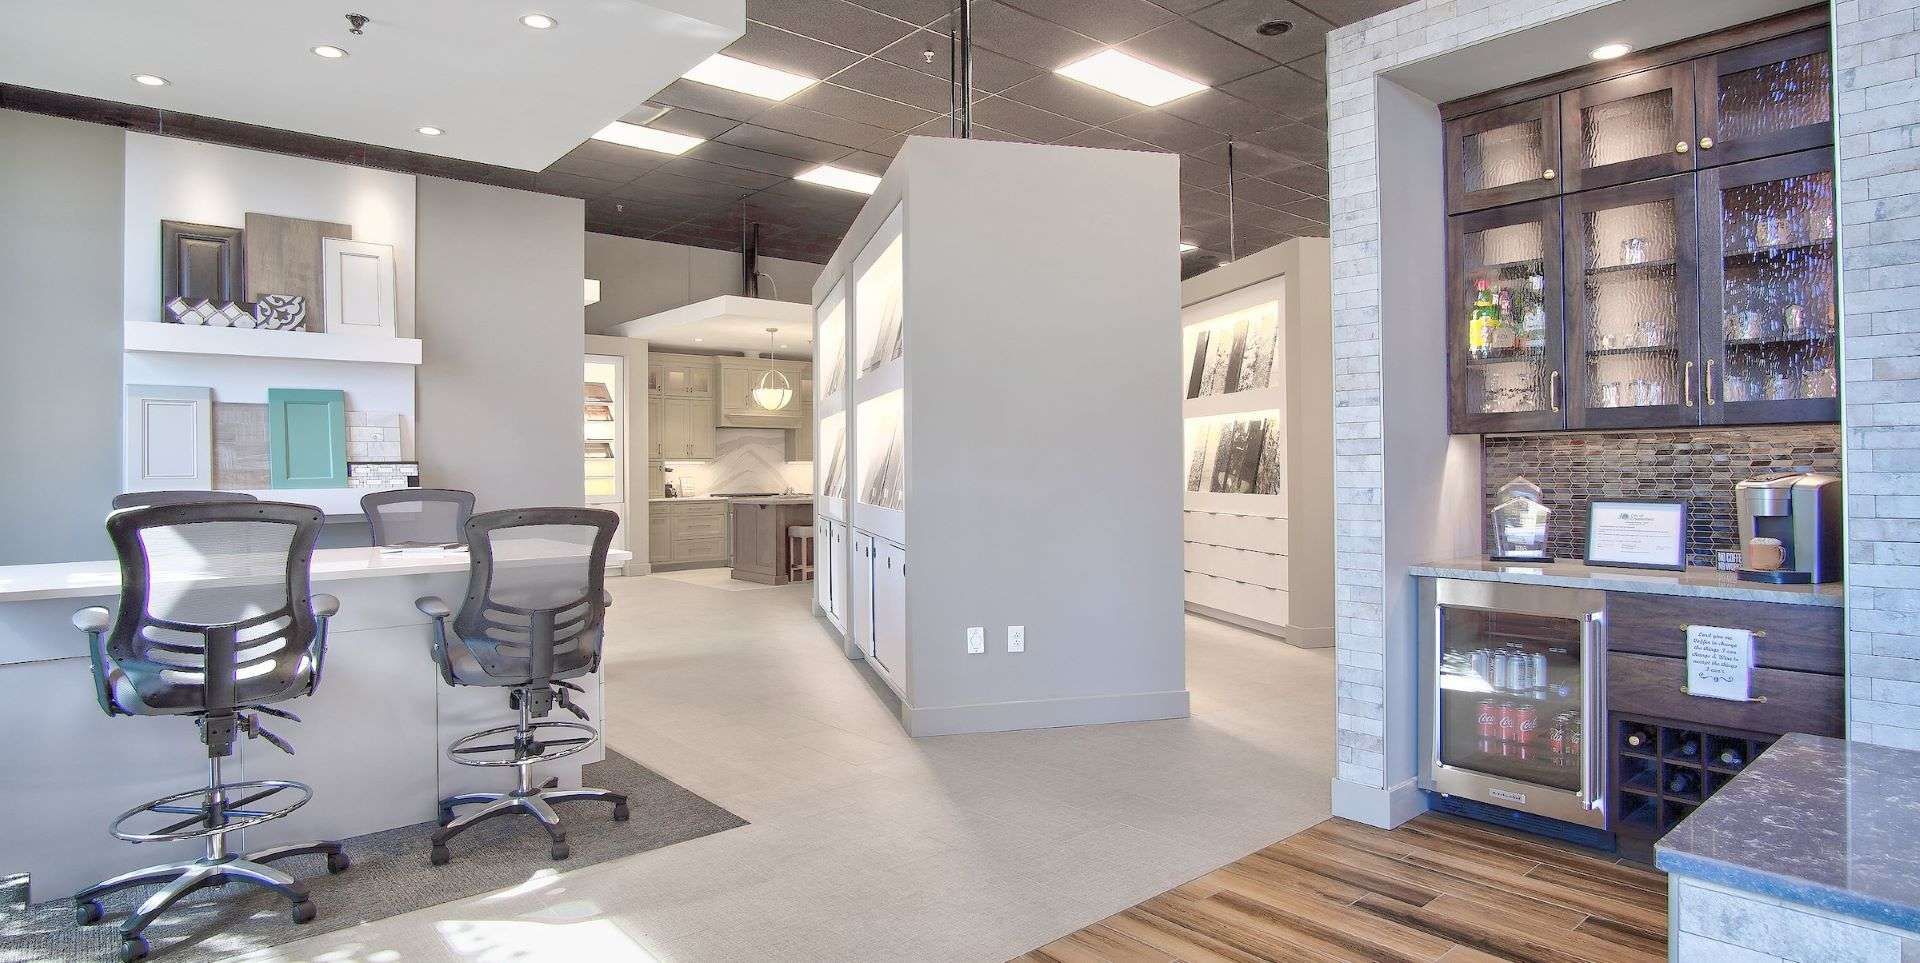 Entrance of the Thompson Price Kitchen and Bathroom Design Center in St Louis, MO. Lay table on left, large white tile display areas in middle, coffee bar with stained cabinetry to the right.